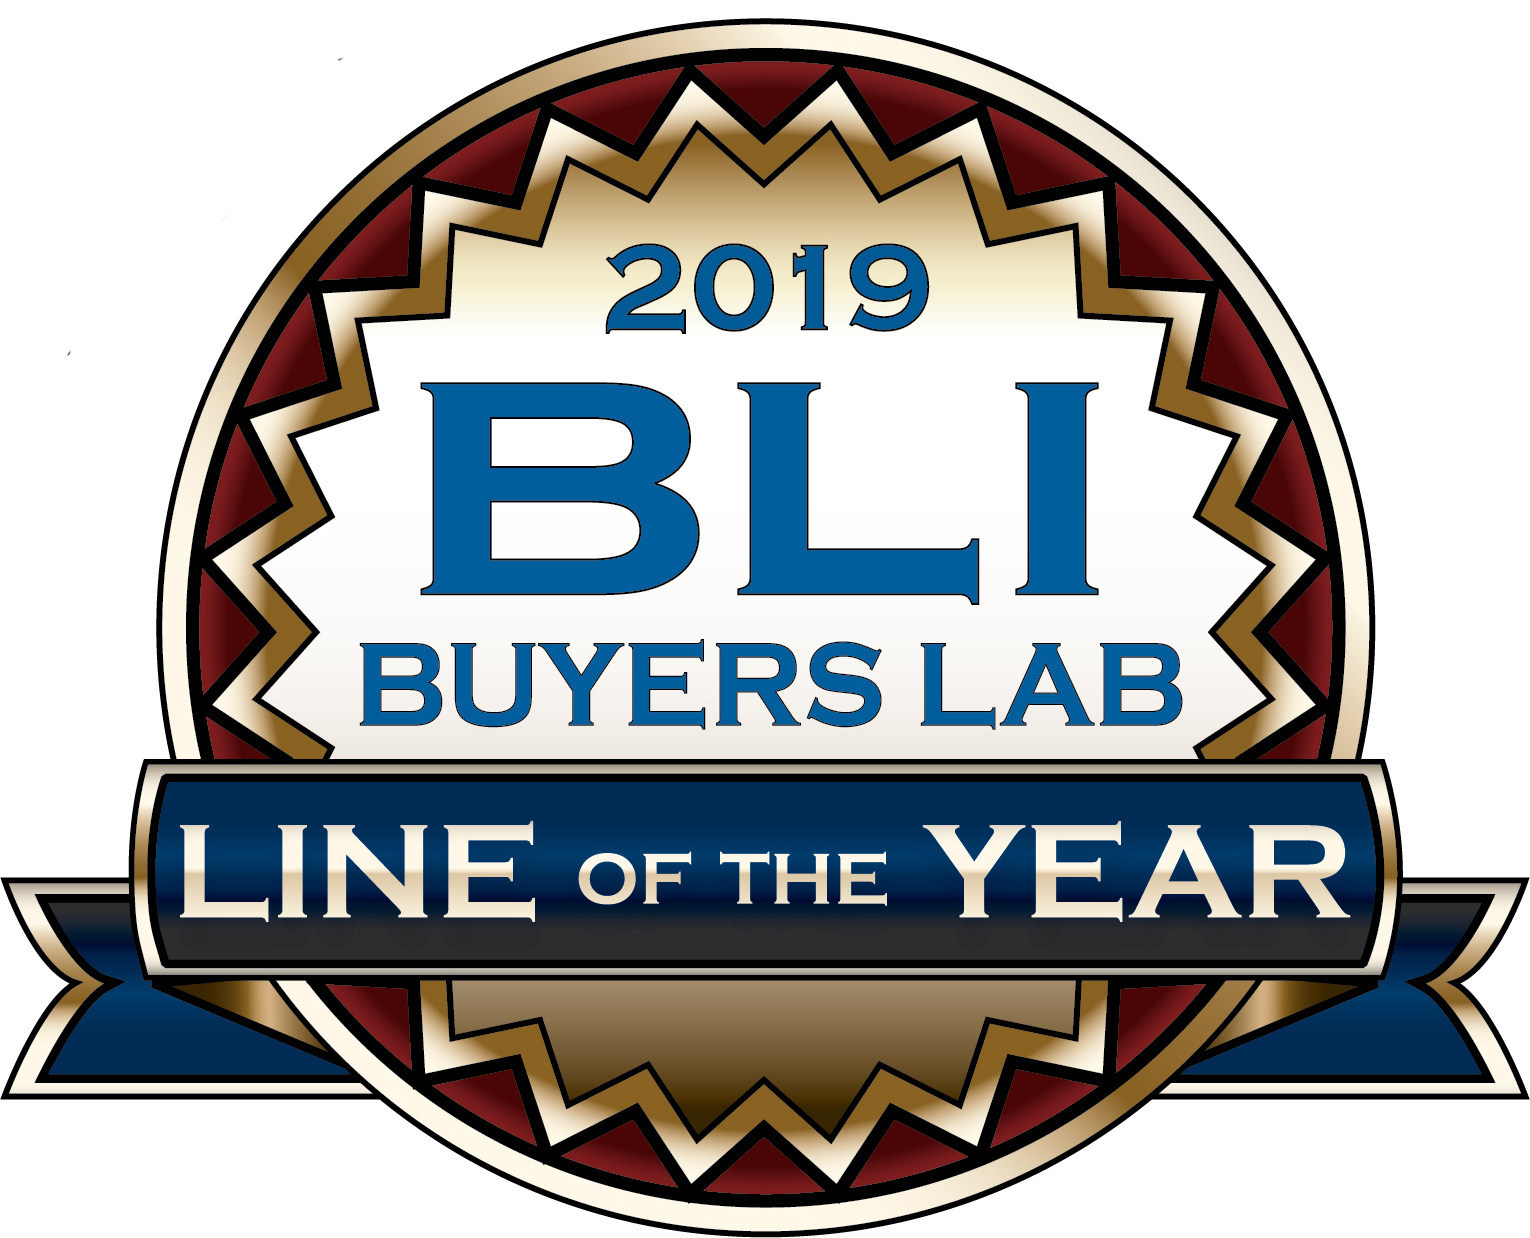 Sharp Earns Buyers Lab 2019 Copier MFP Line of the Year Award